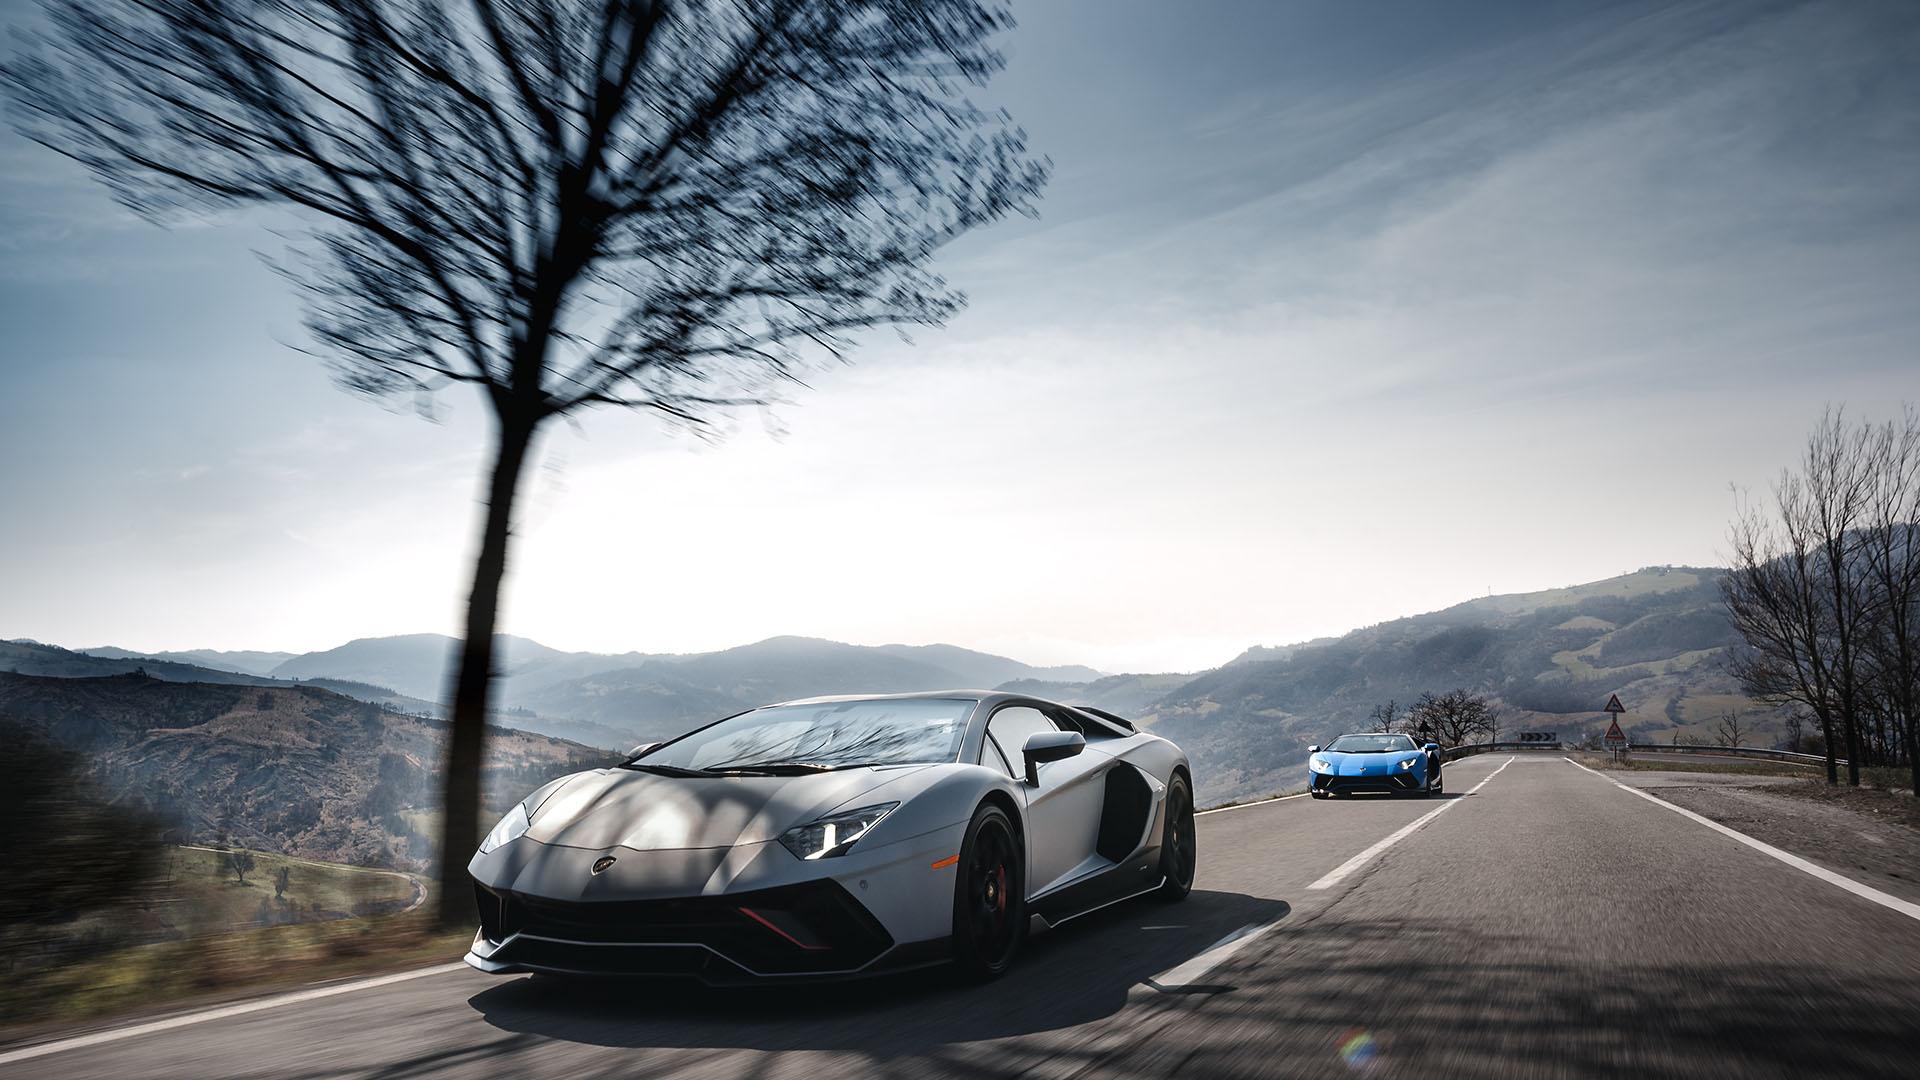 Aventador ultimae on the road 10